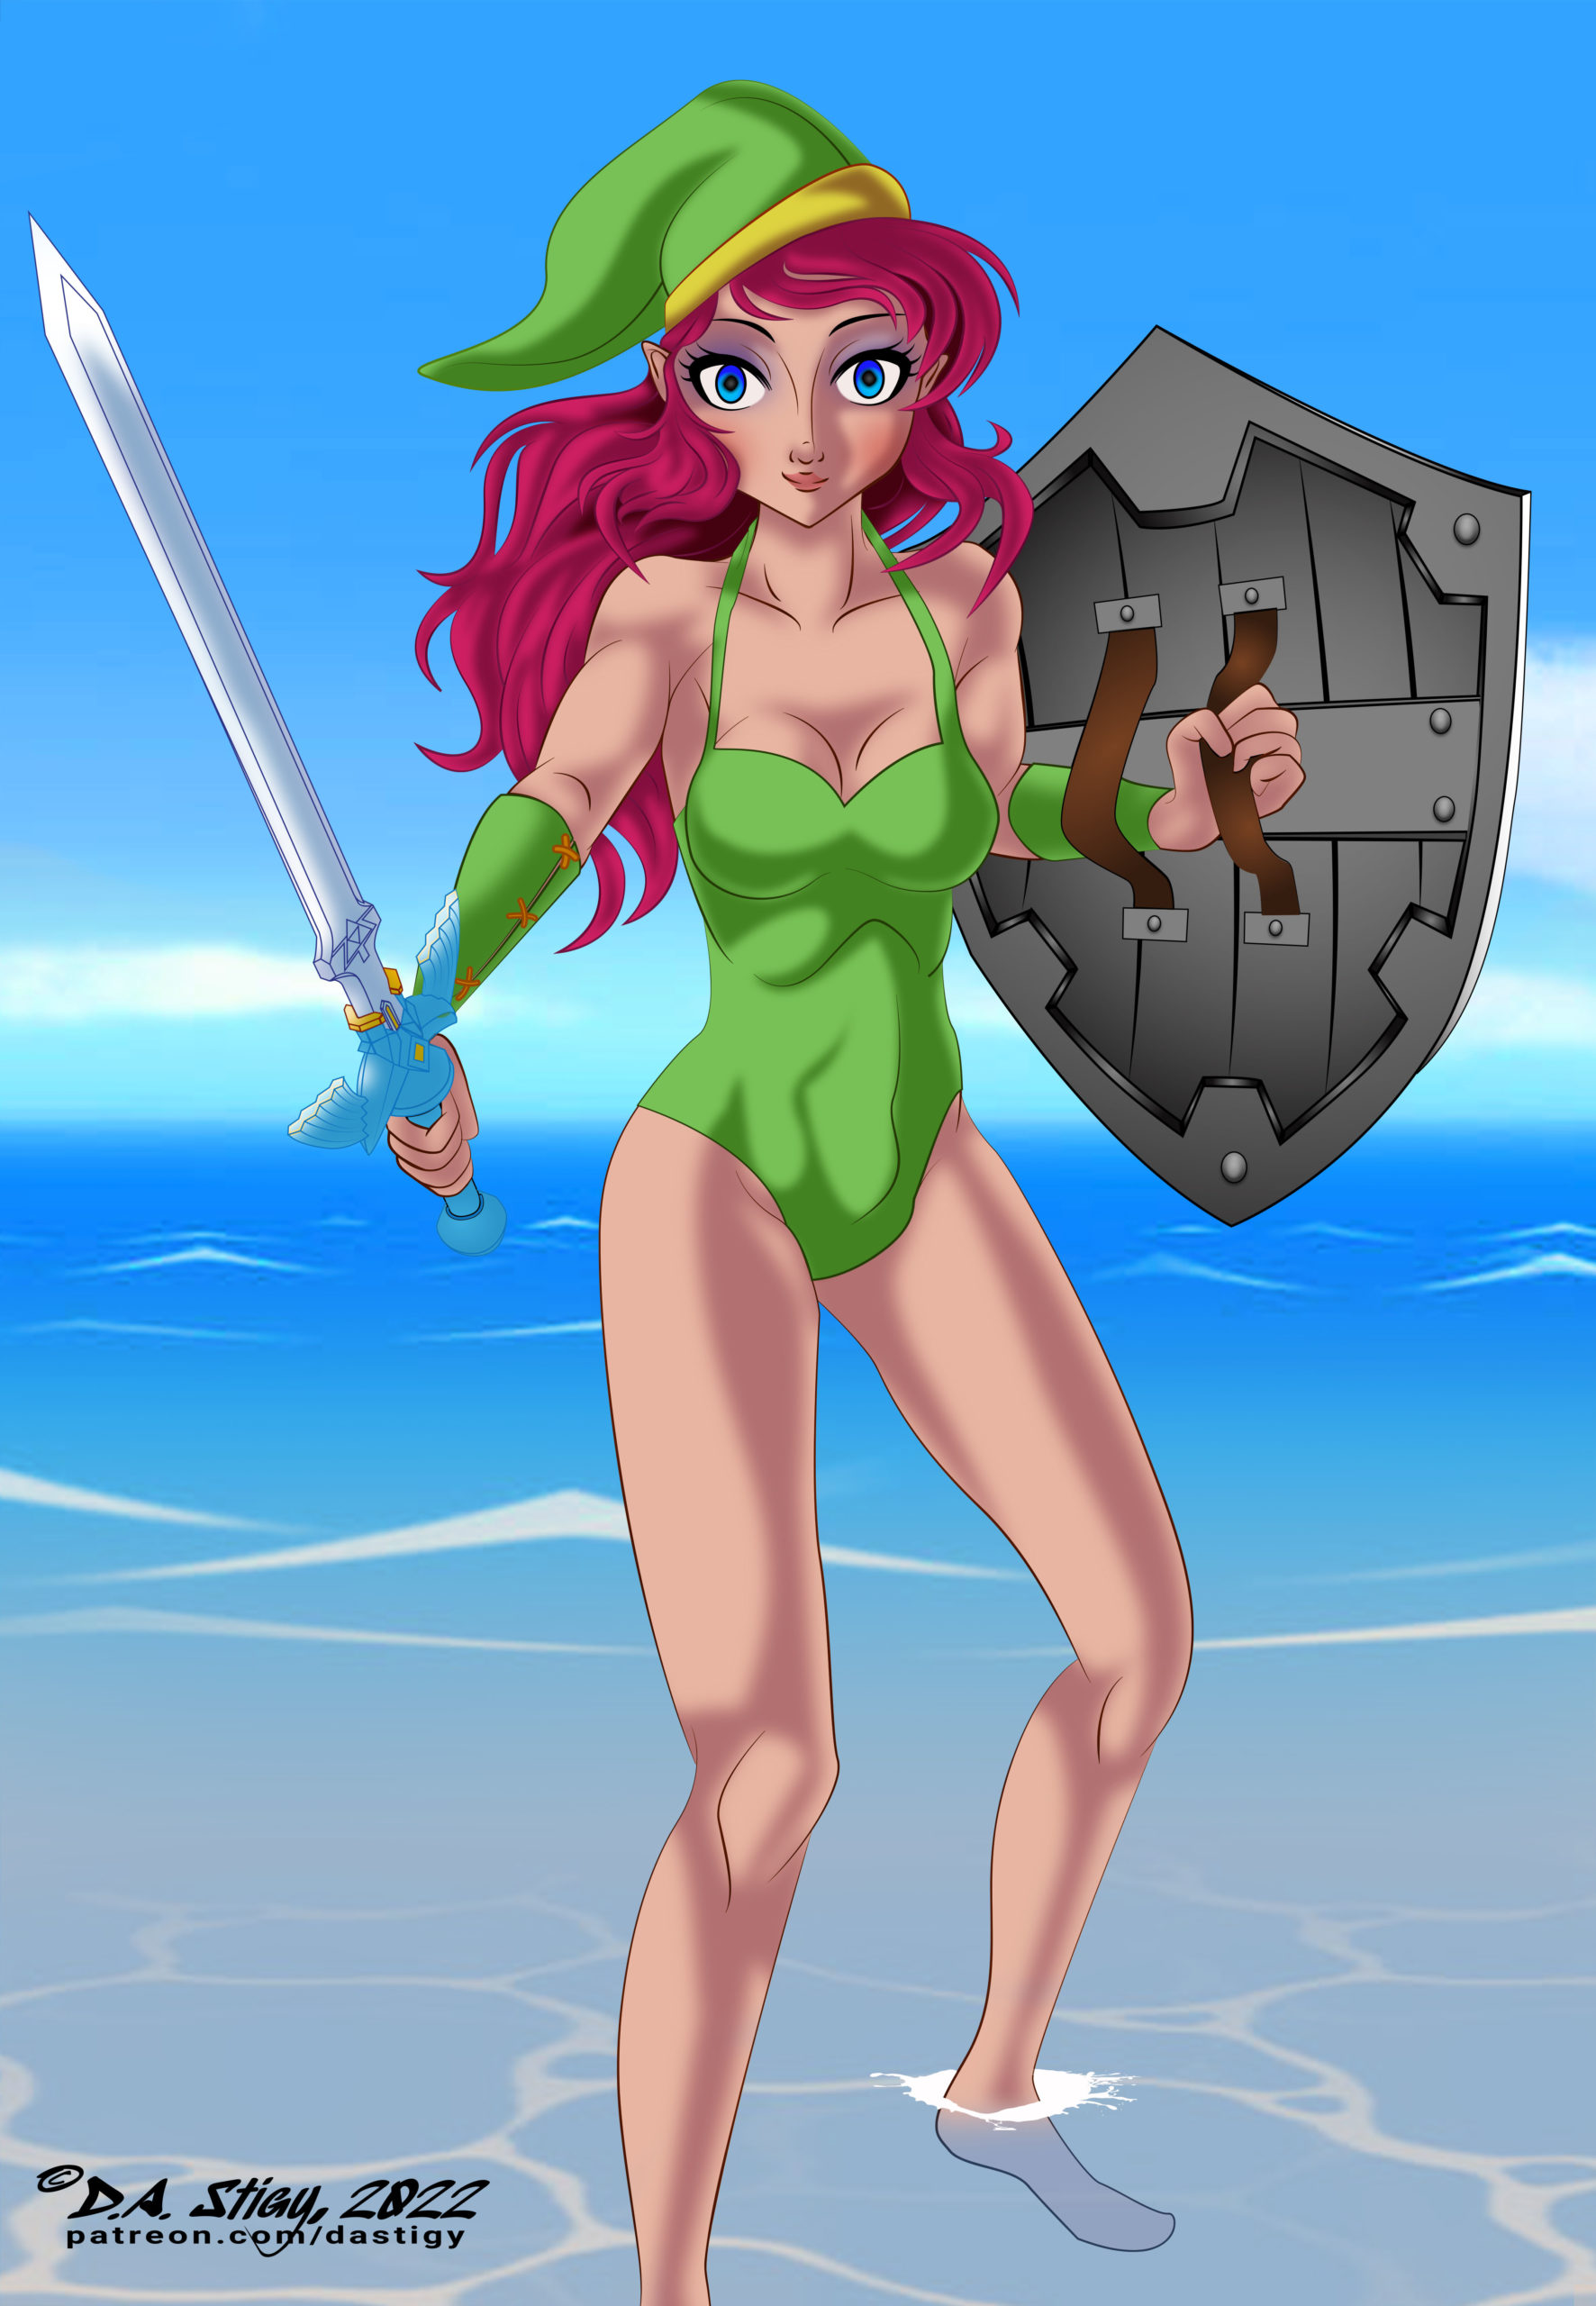 Female version of Link stands with sword and shield in the surf